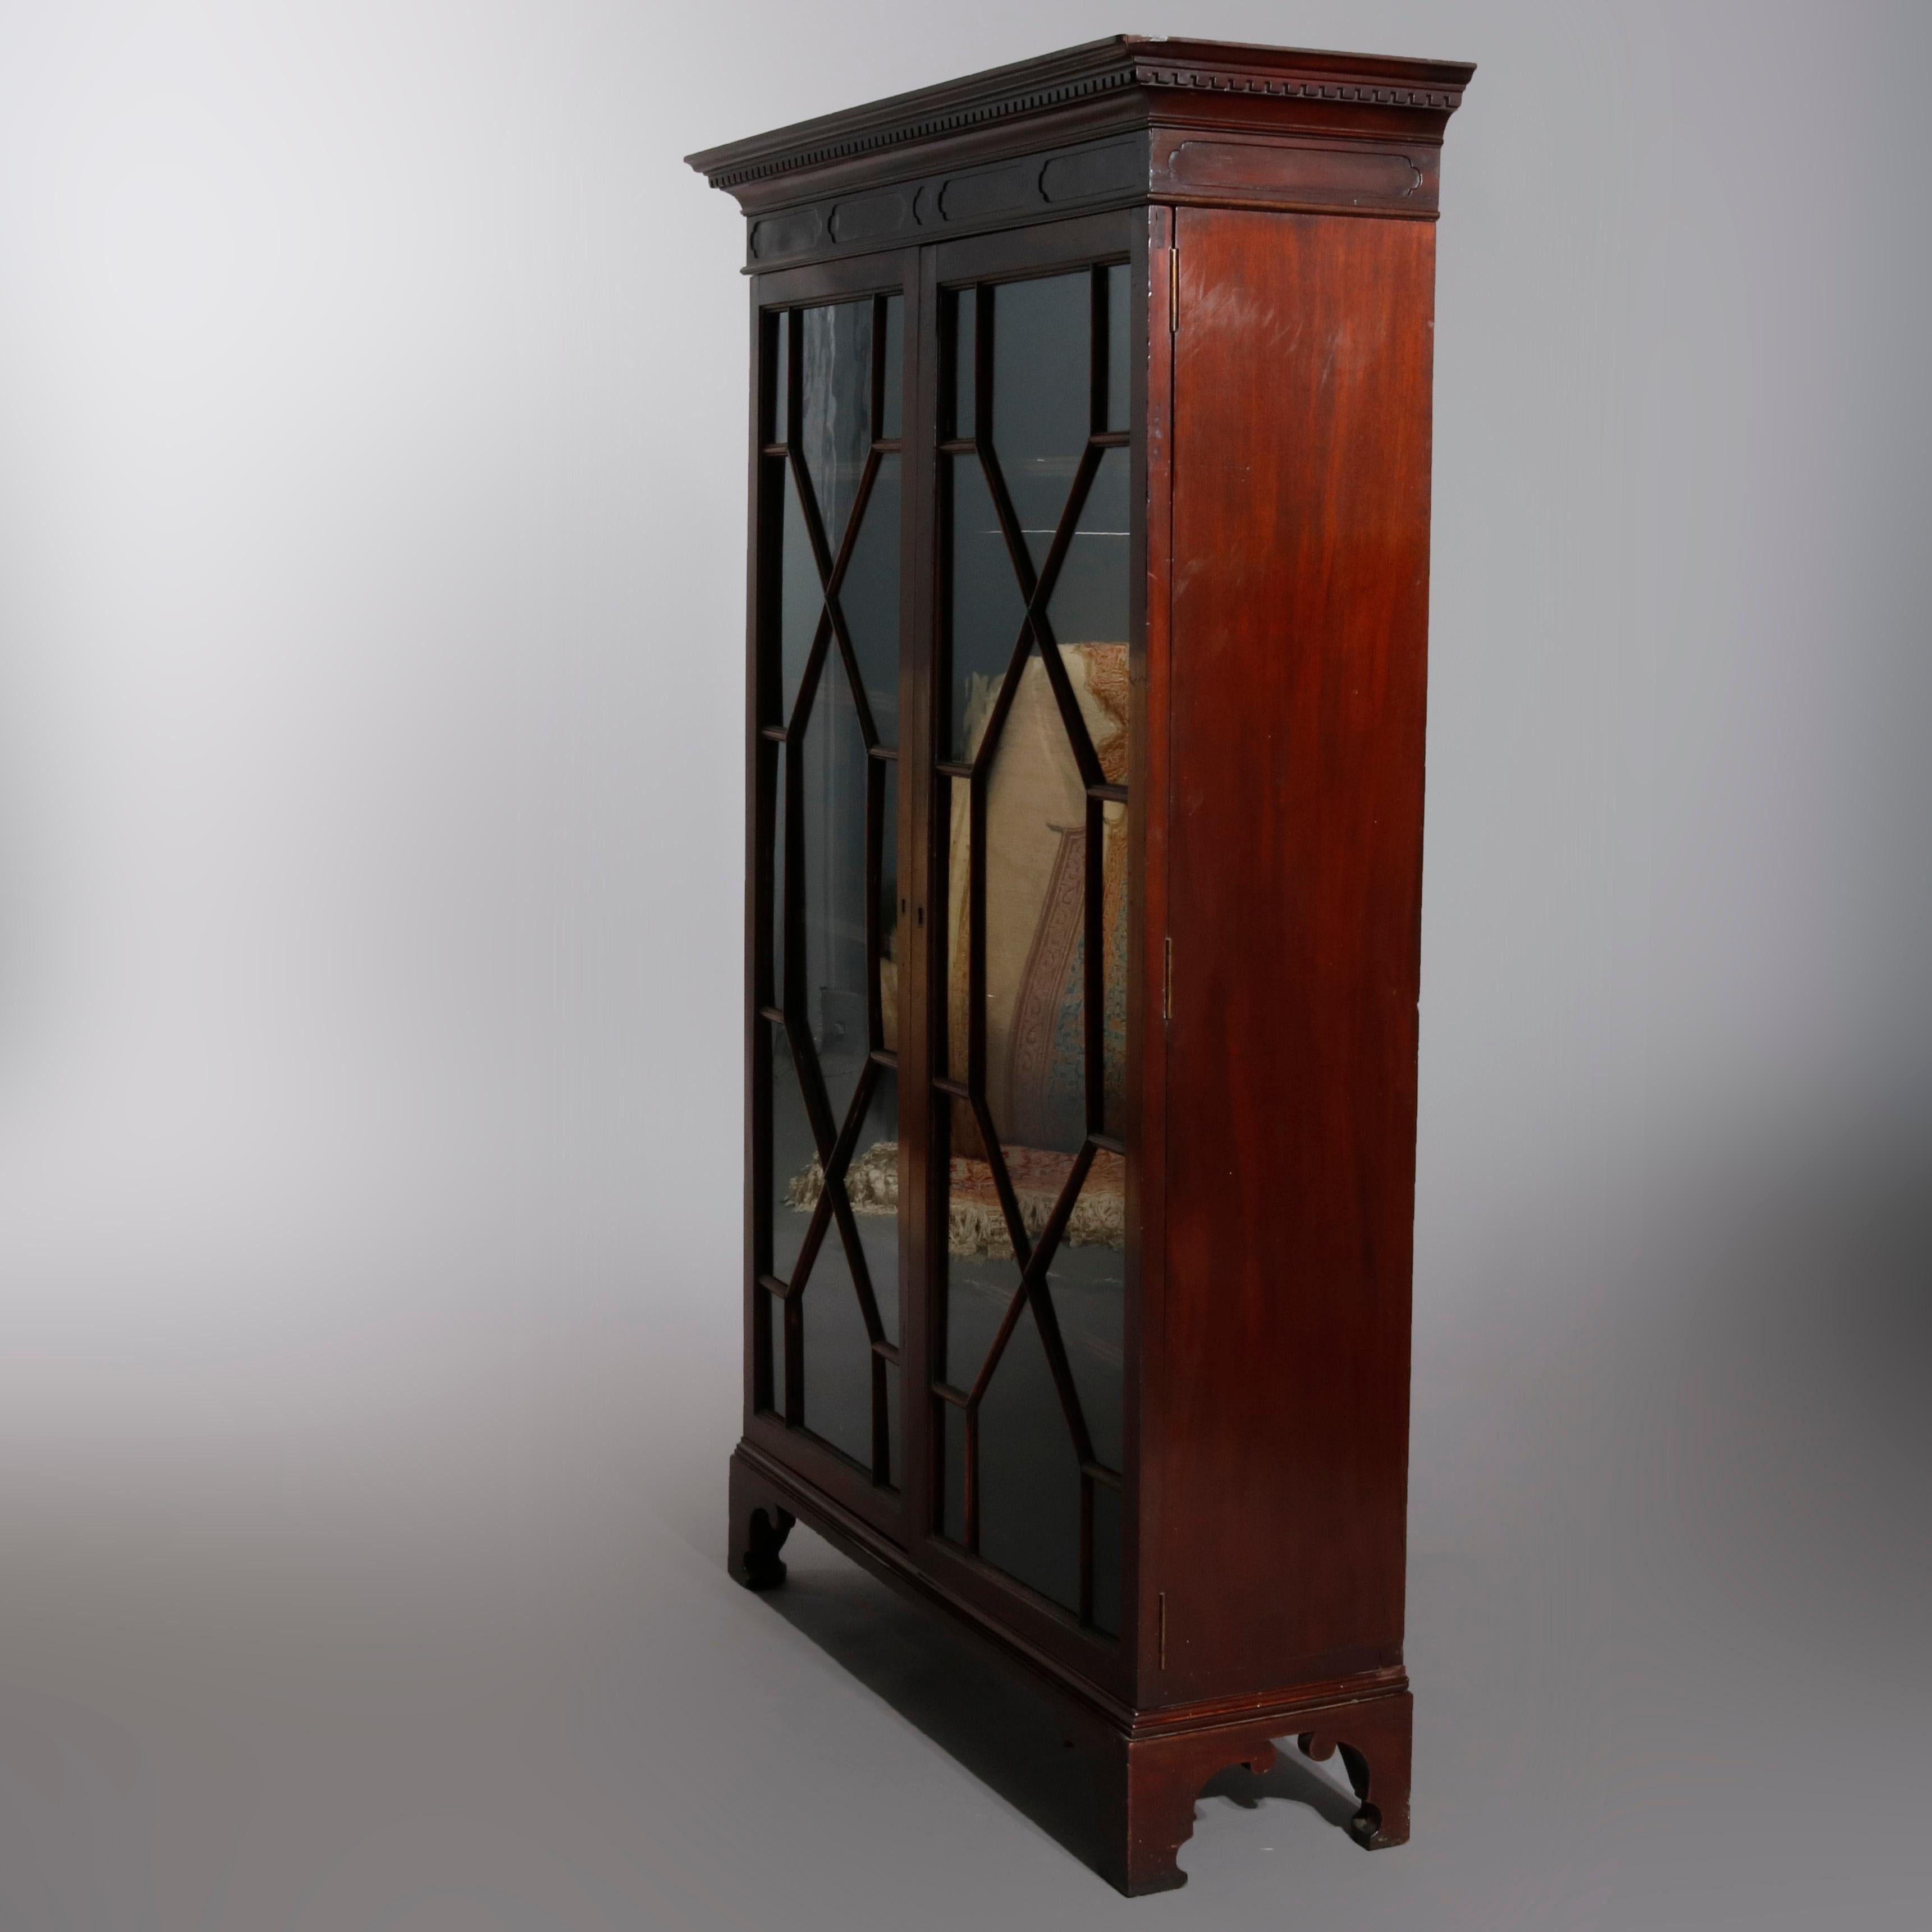 An antique English Georgian bookcase offers mahogany construction with case having dental frieze over double mullioned glass doors opening to adjustable shelf interior, raised on bracket feet, circa 1810.

Measures: 58.25